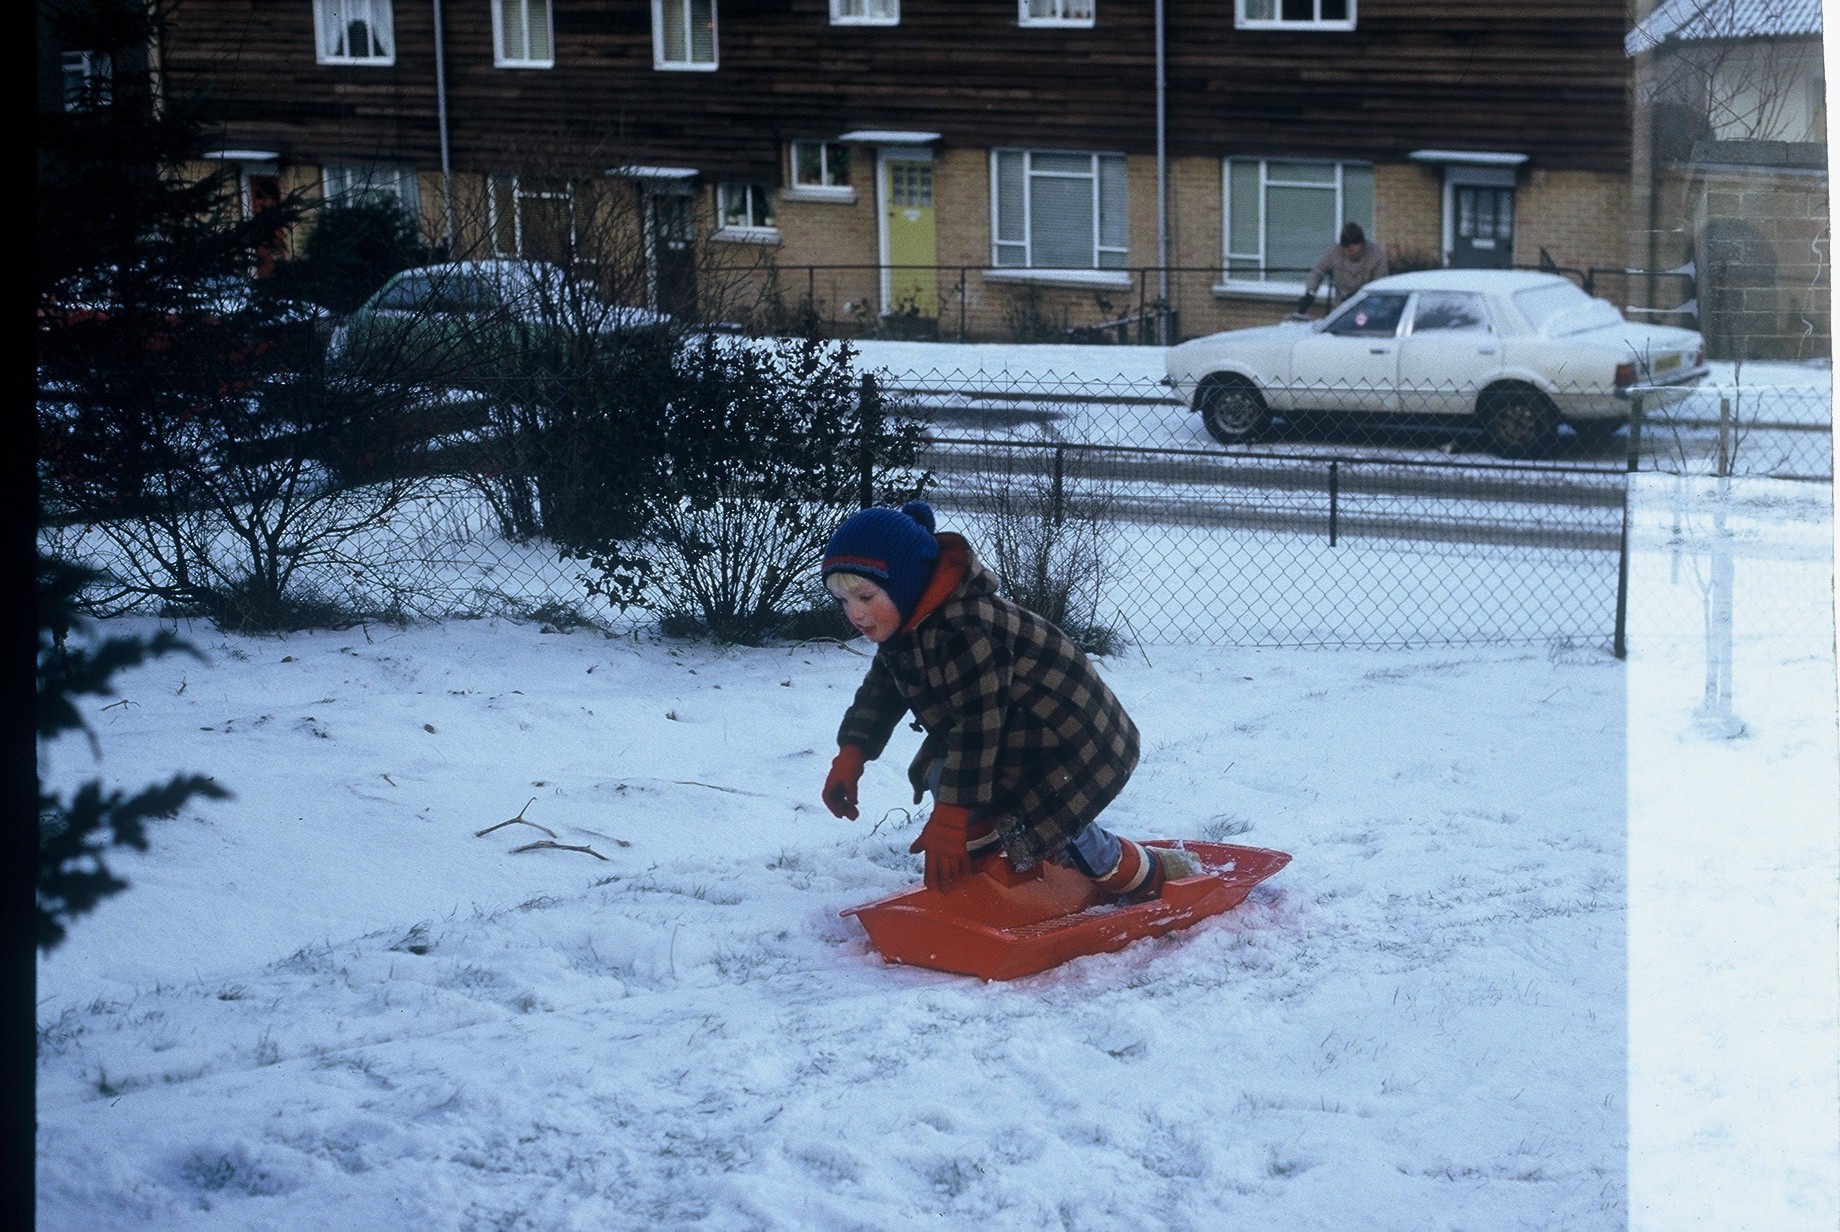 Dan, aged around 4, dressed in a duffel coat, bobble hat and gloves, kneeling on a red plastic sledge in a snow-filled garden. The garden is bordered by a wire fence, and in the background a man can be seen scraping icee off a car.